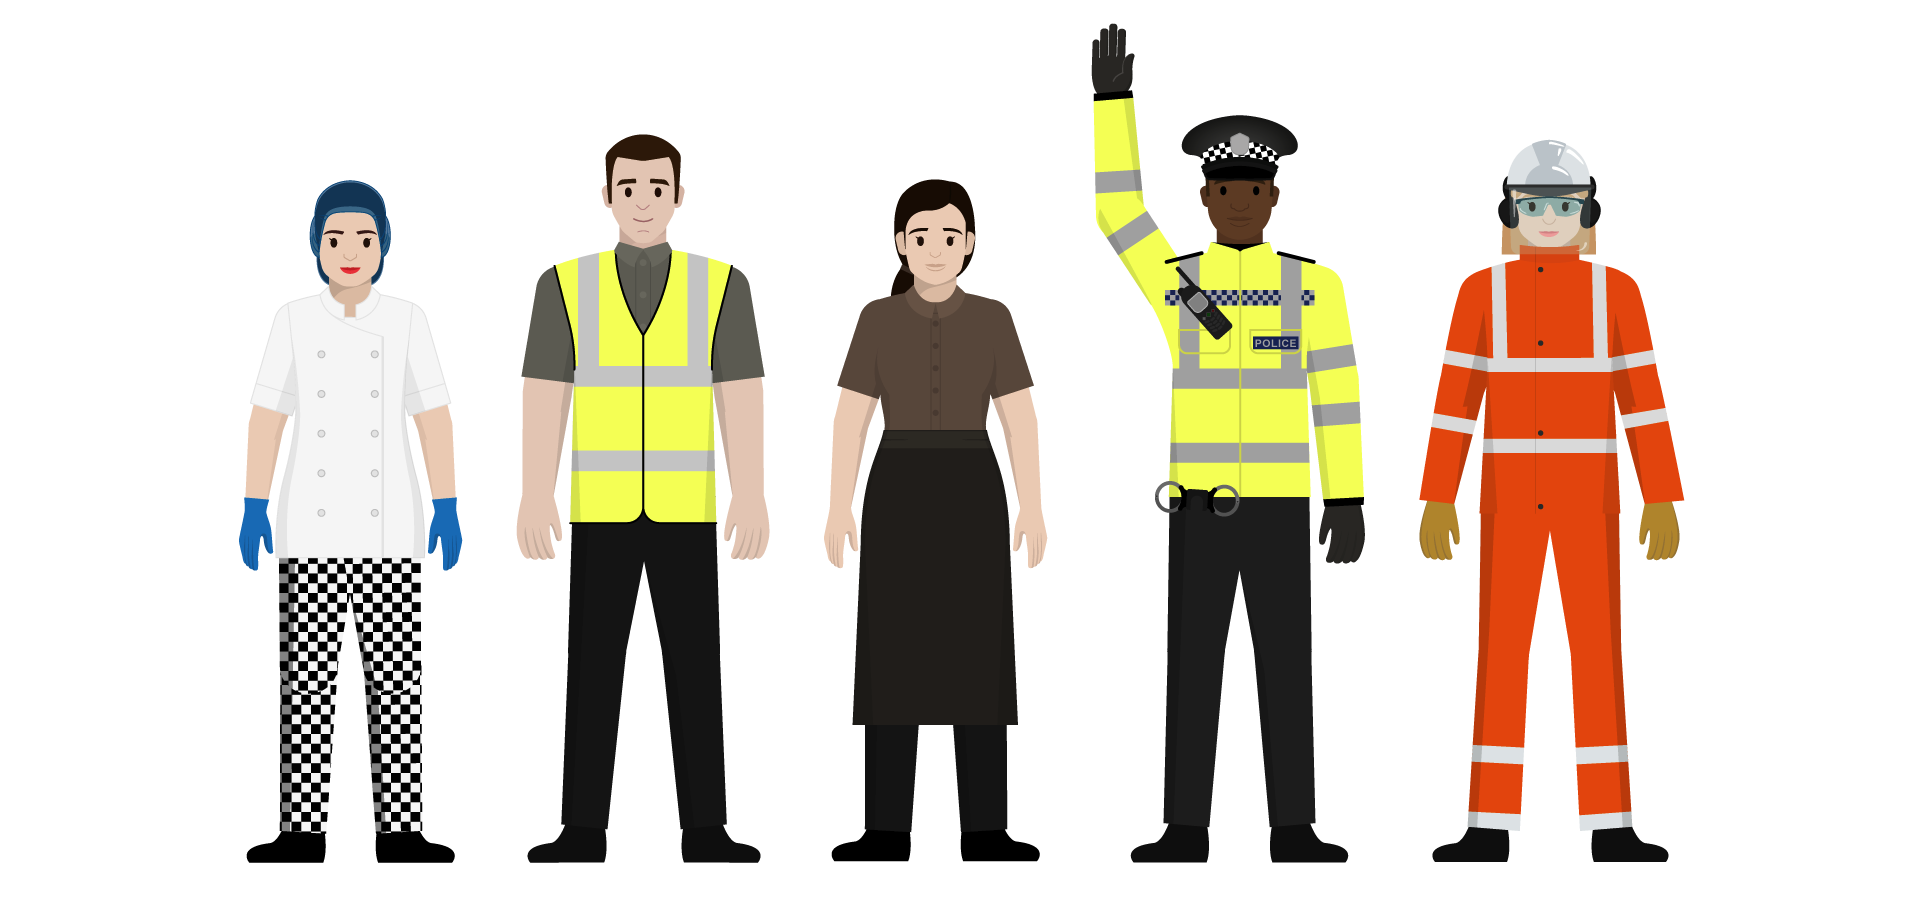 Five characters in a row: a female kitchen worker, a man in a high viz jacket, a female housekeepr, a police man and a female road worker wearing an orange suit.